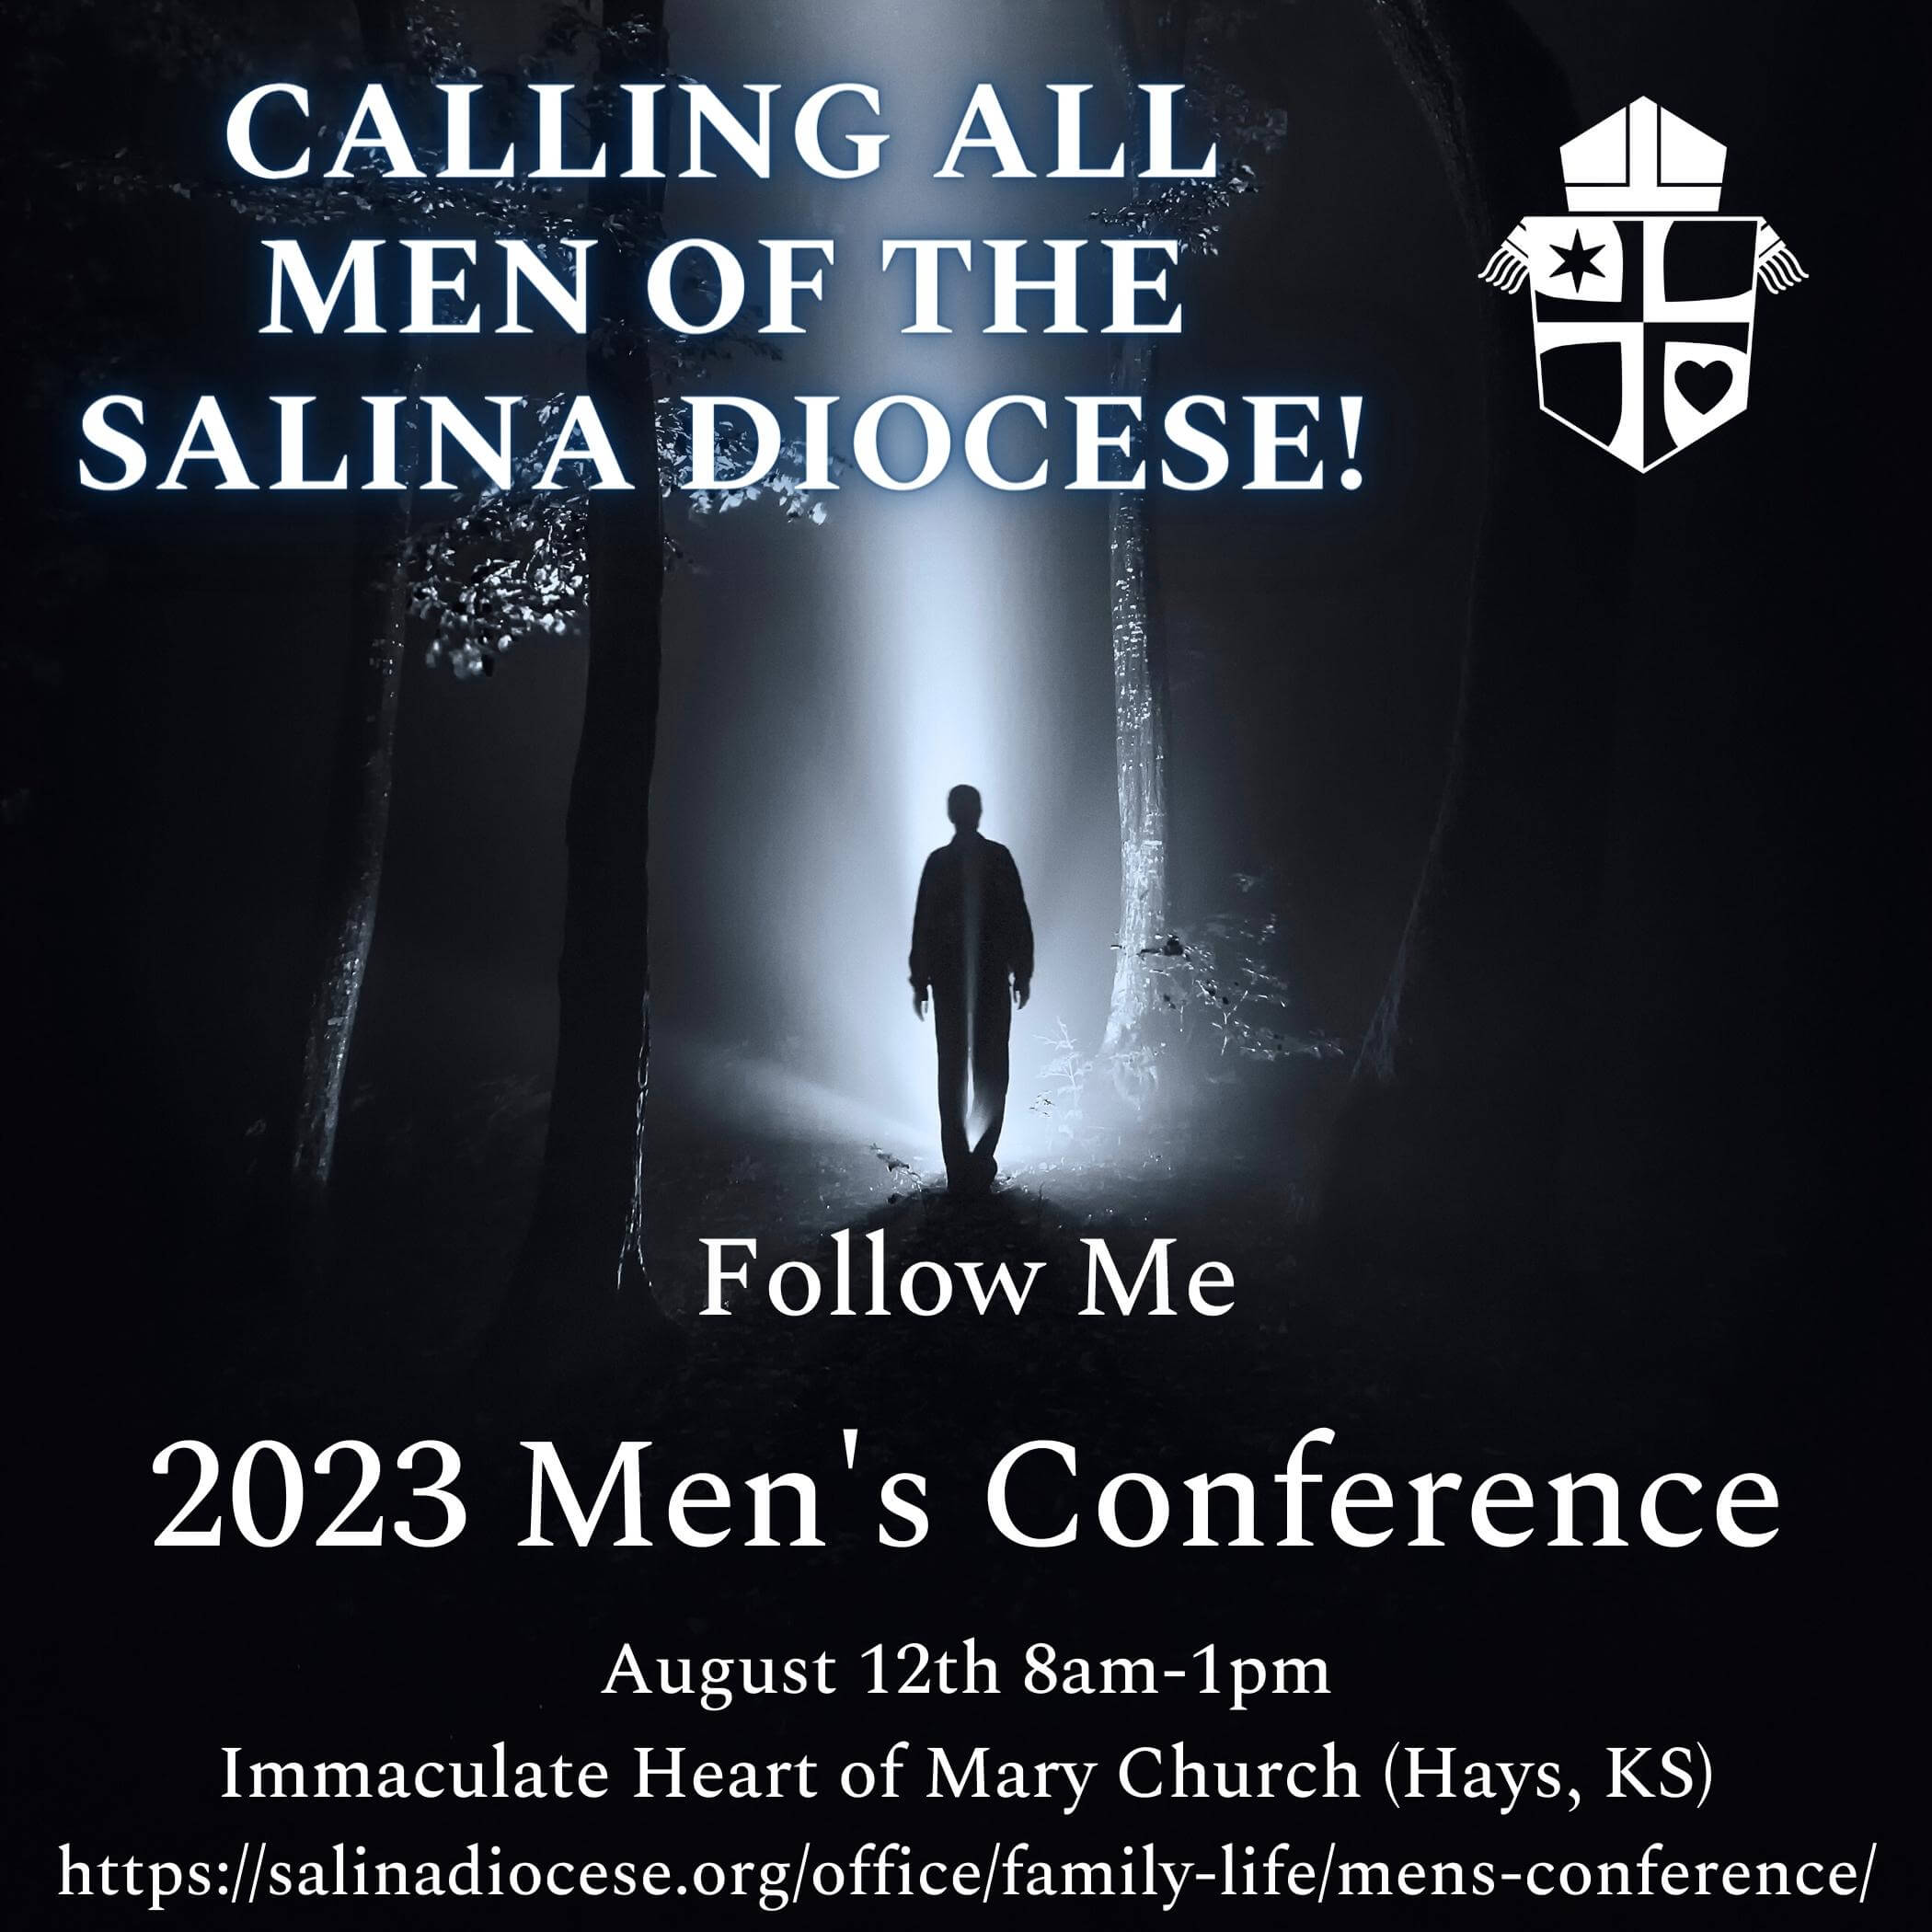 https://salinadiocese.org/wp-content/uploads/2021/03/Mens-Conference-Save-the-Date.jpg